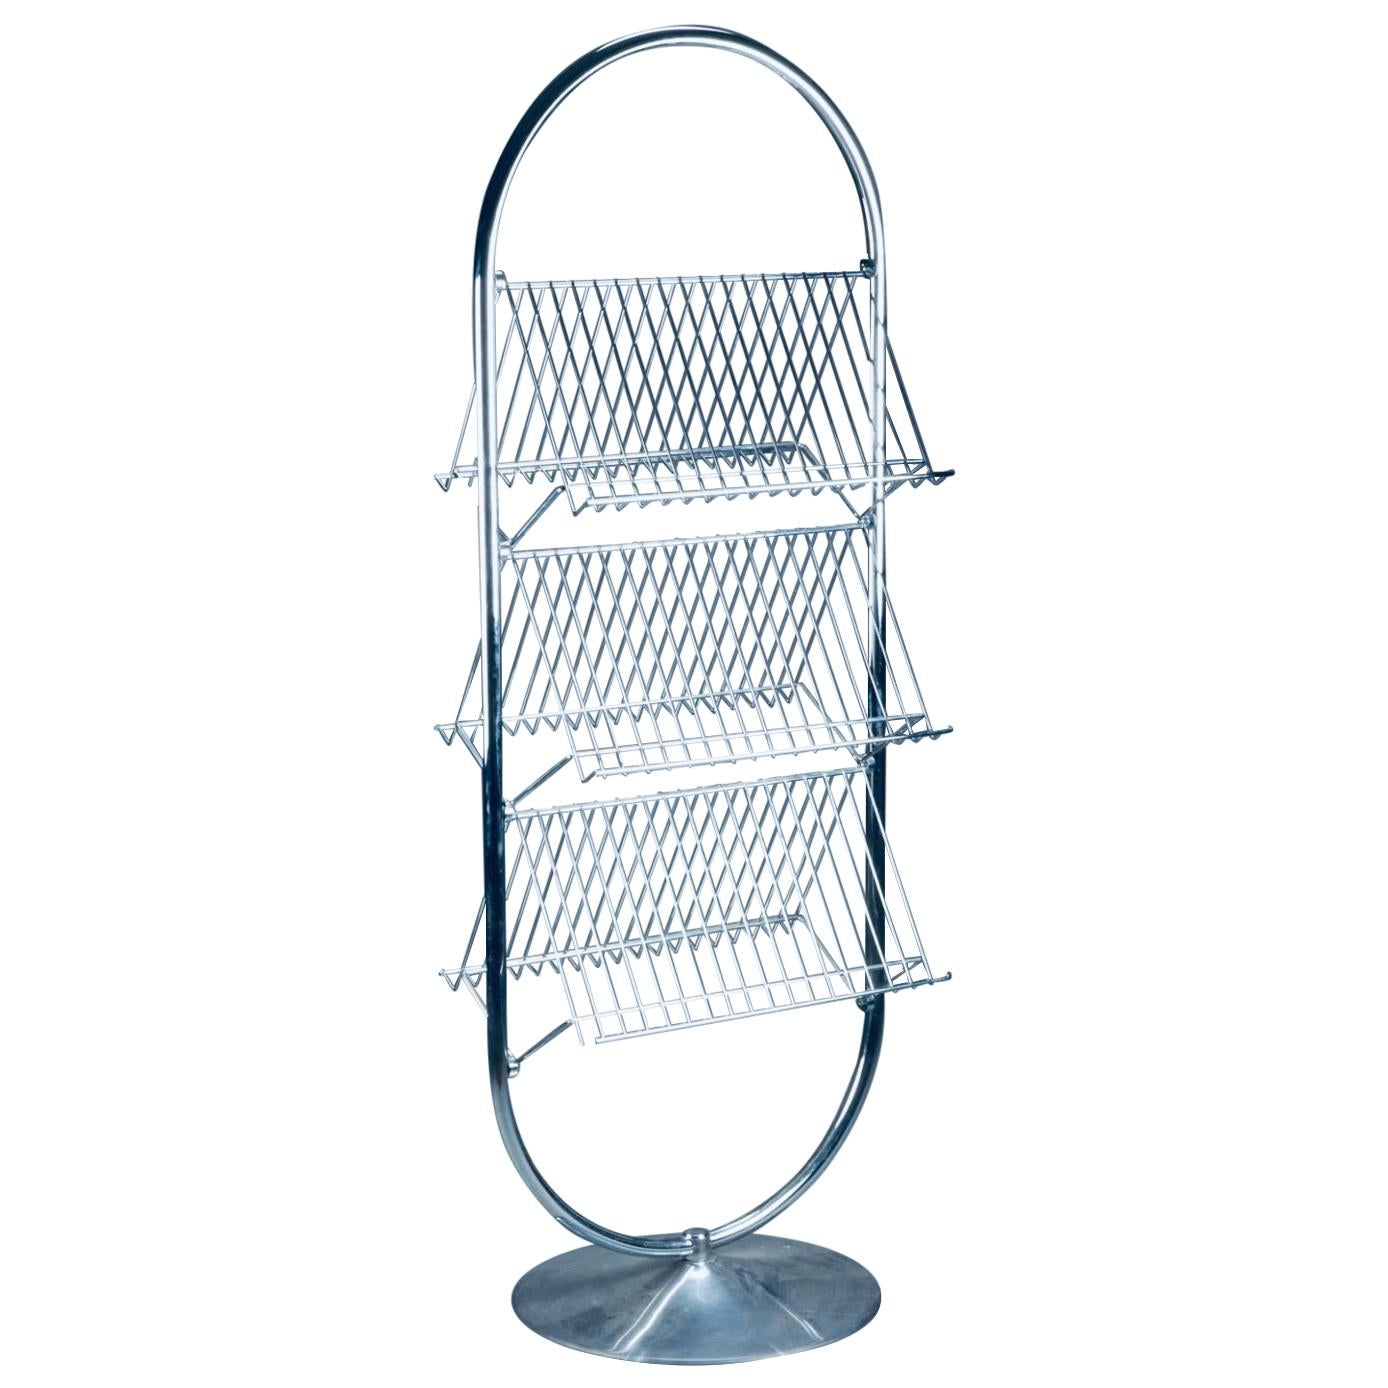 Chrome-plated VP-rack display stand with 6 shelves, designed in 1973 by Verner Panton, executed in the 1990s by Fritz Hansen, Denmark (discontinued). To use as a display rack or magazine rack.
Labelled.